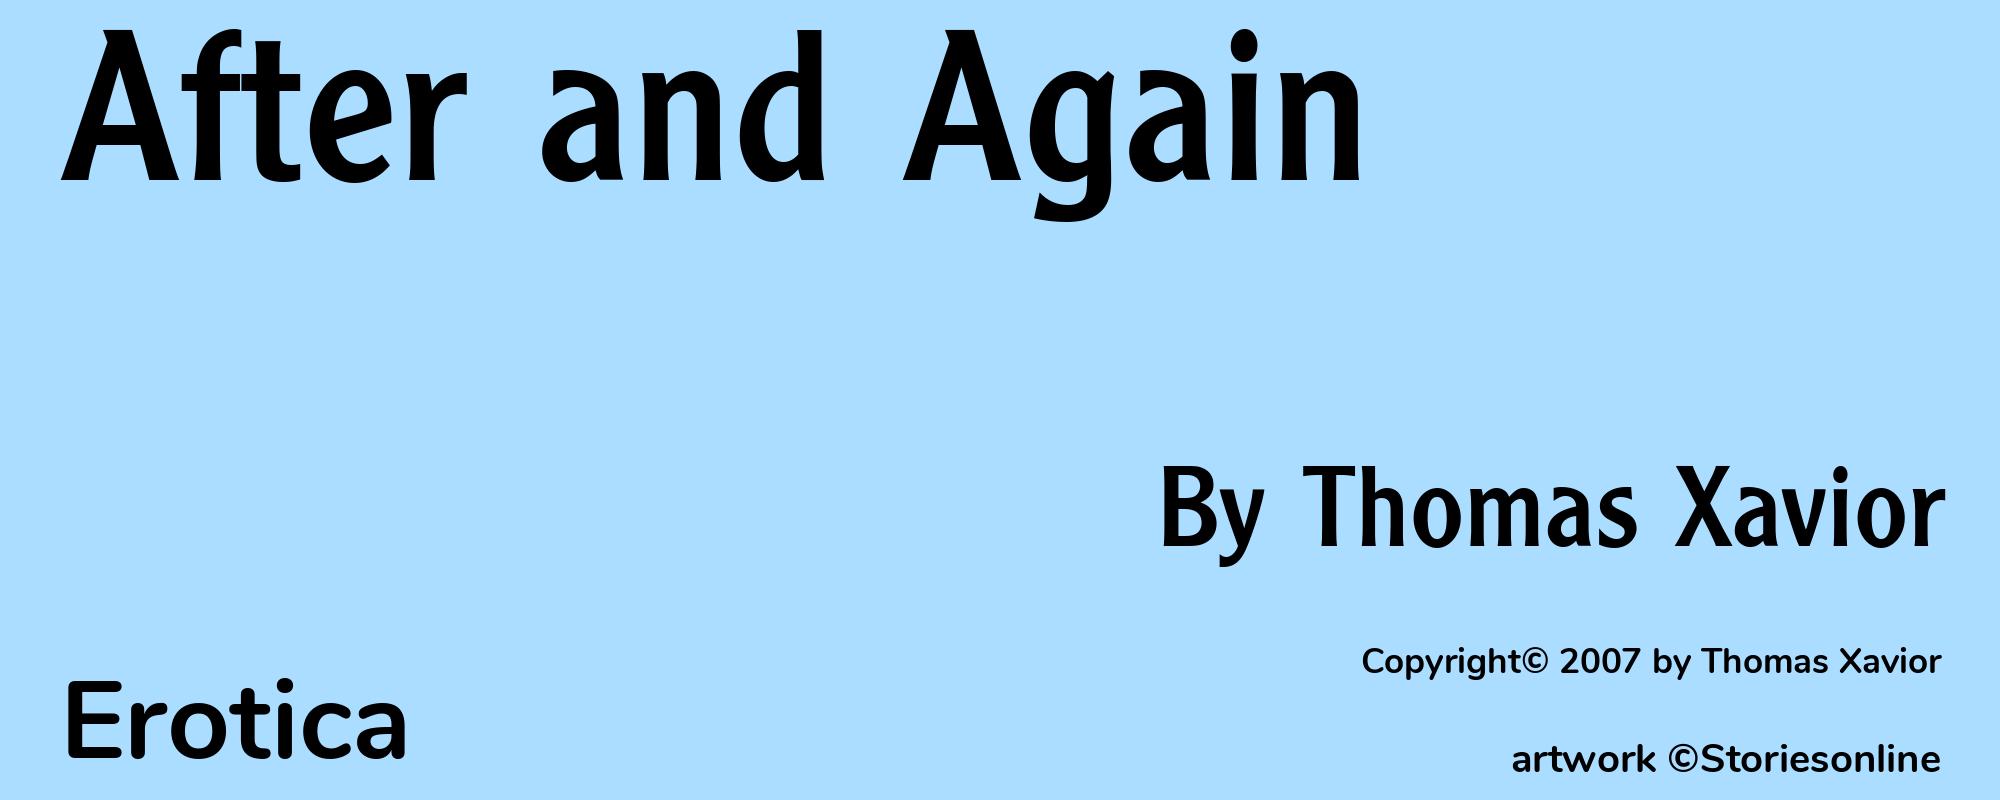 After and Again - Cover